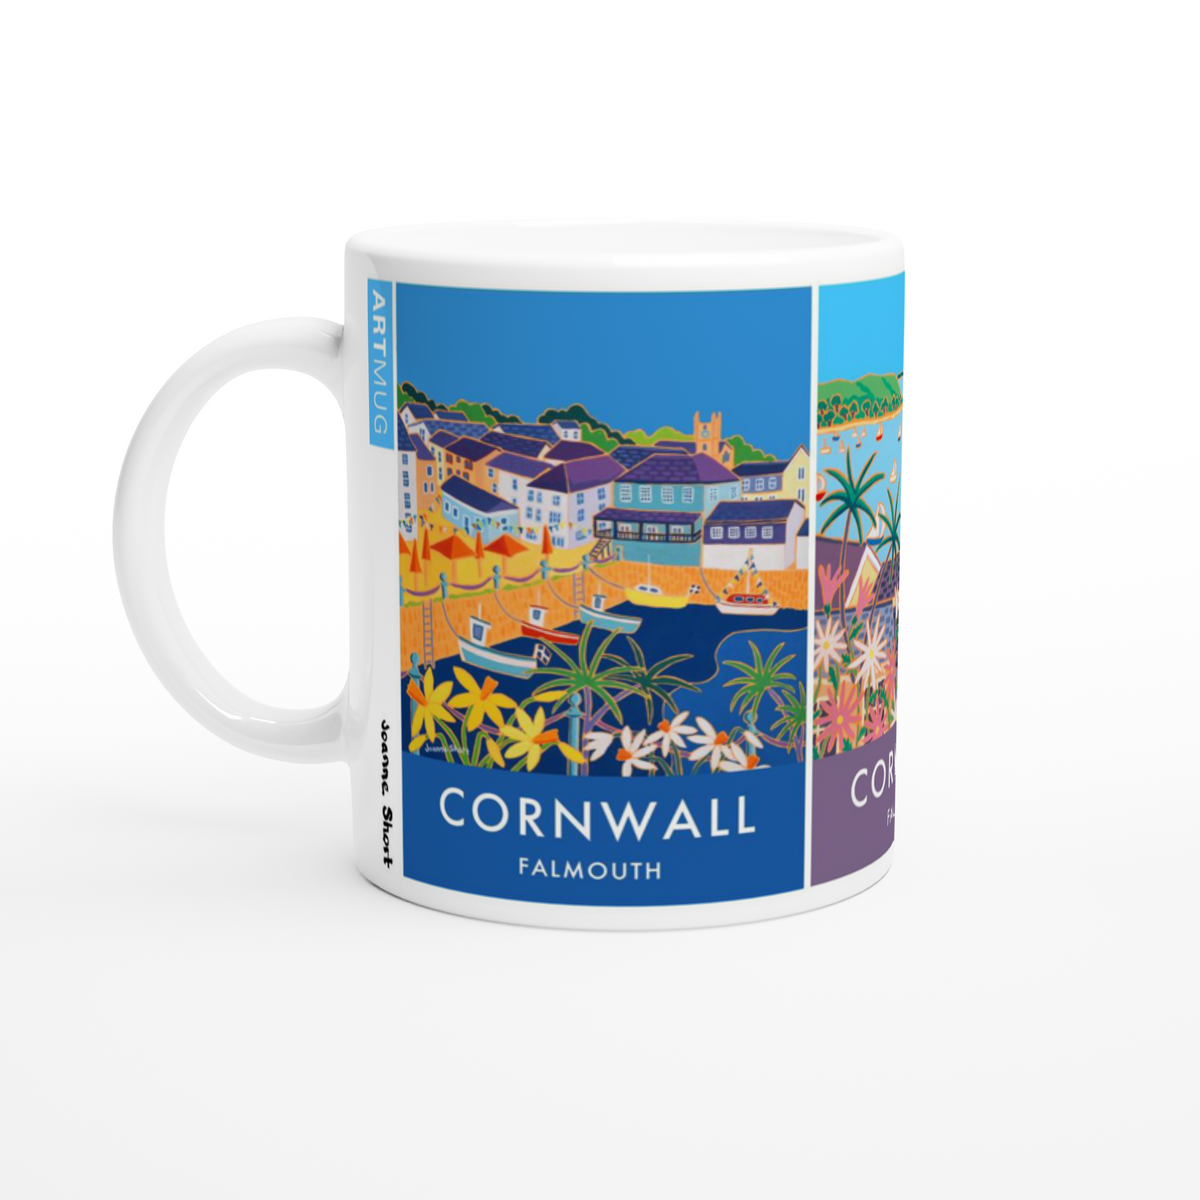 Art Mug of Falmouth and Mylor Harbour in Cornwall by Joanne Short